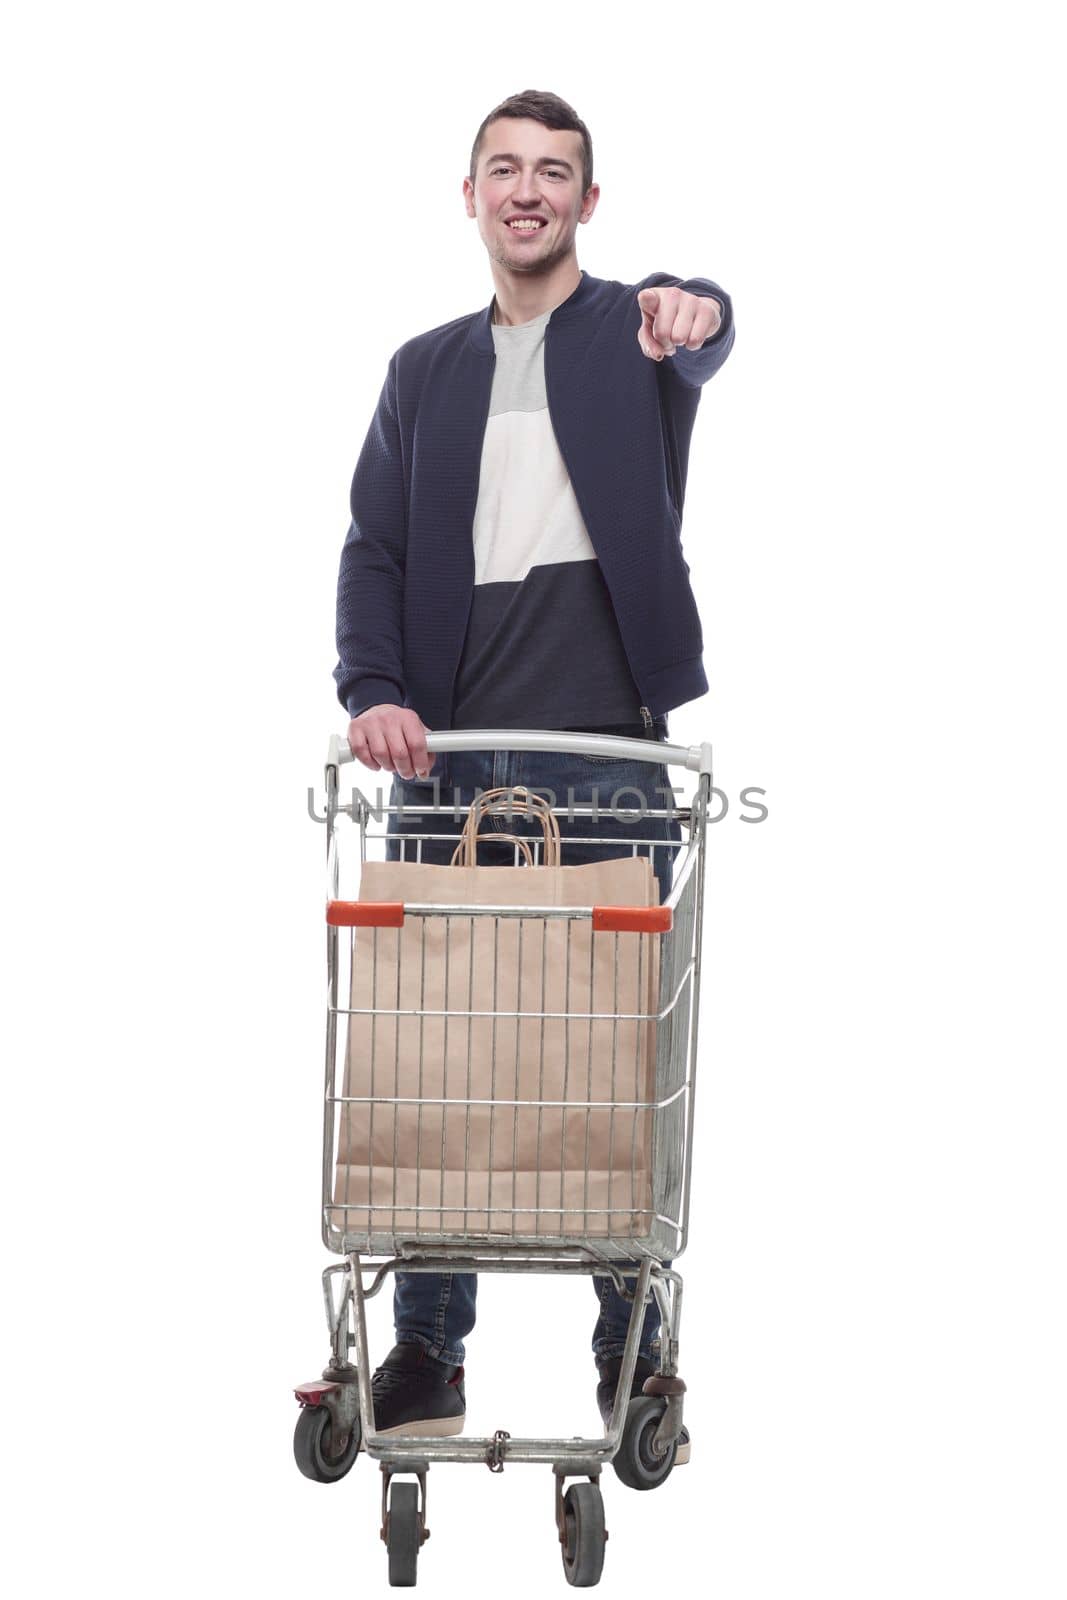 smiling young man with a shopping cart . isolated on a white background.